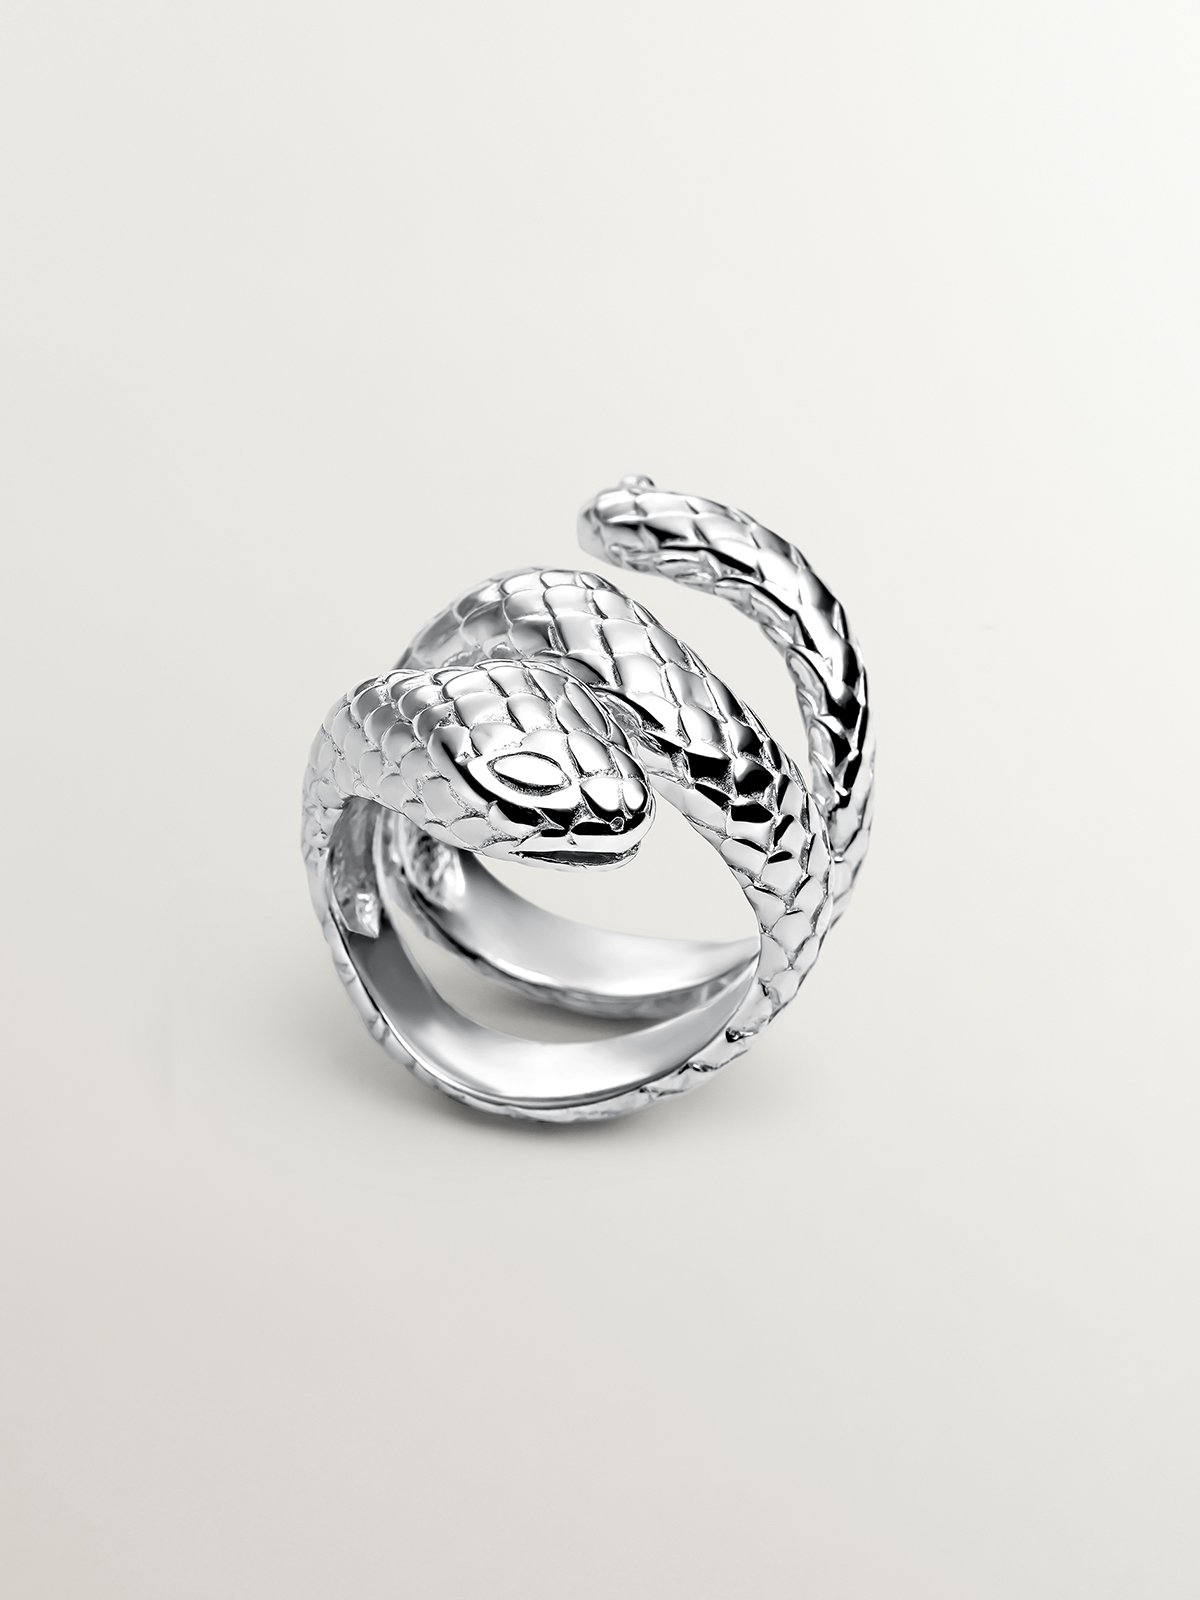 Wide 925 silver ring in the shape of a snake.